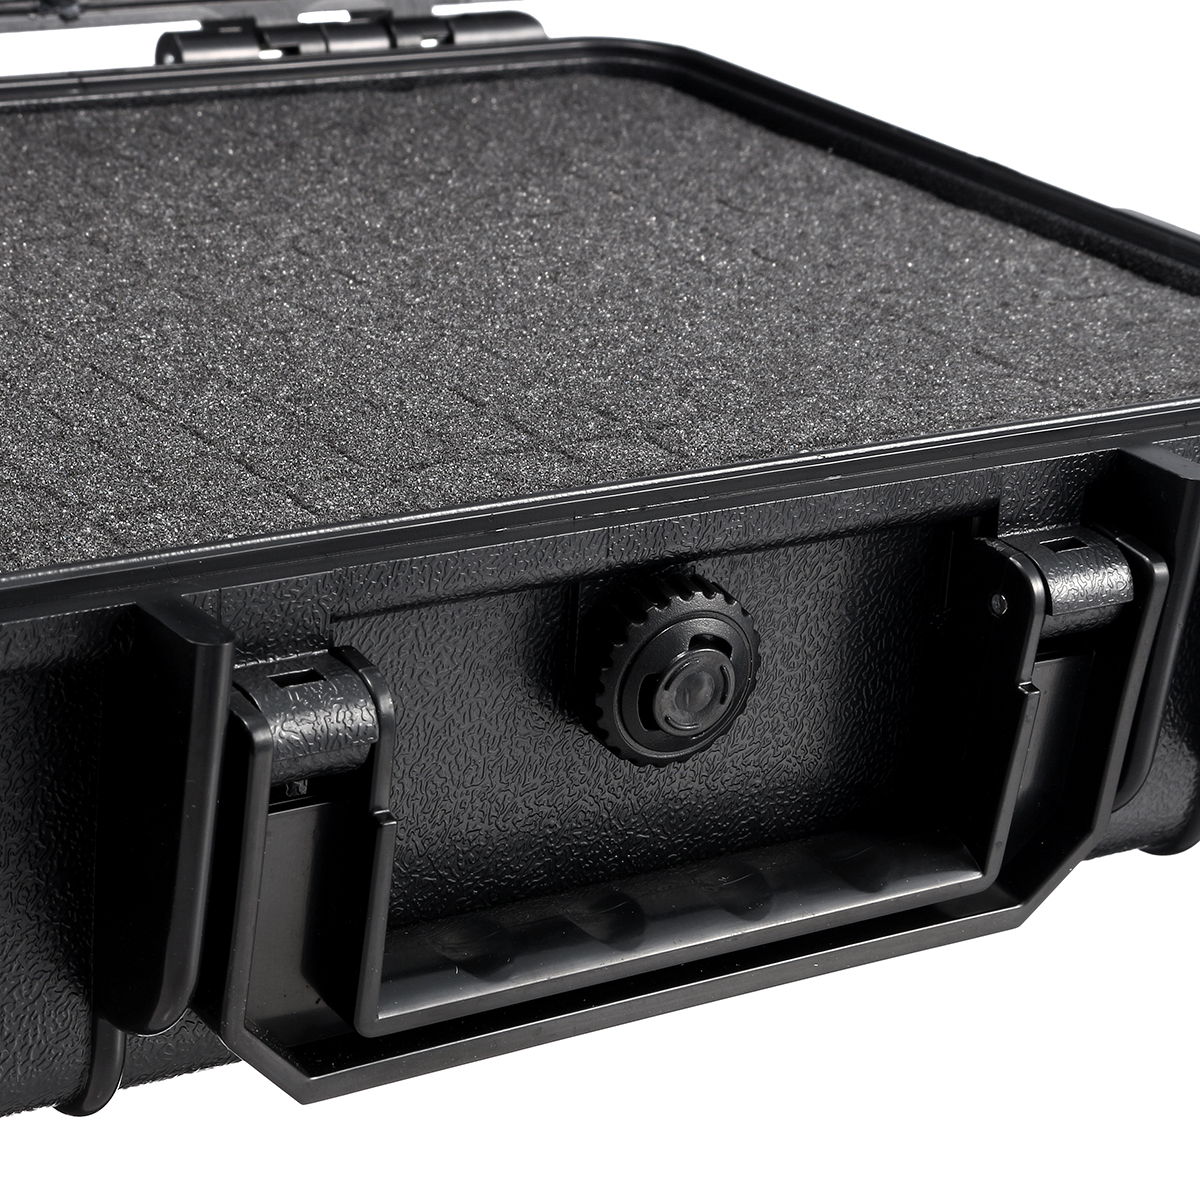 Waterproof-Hard-Carry-Tool-Case-Bag-Storage-Box-Camera-Photography-with-Sponge-1636226-6